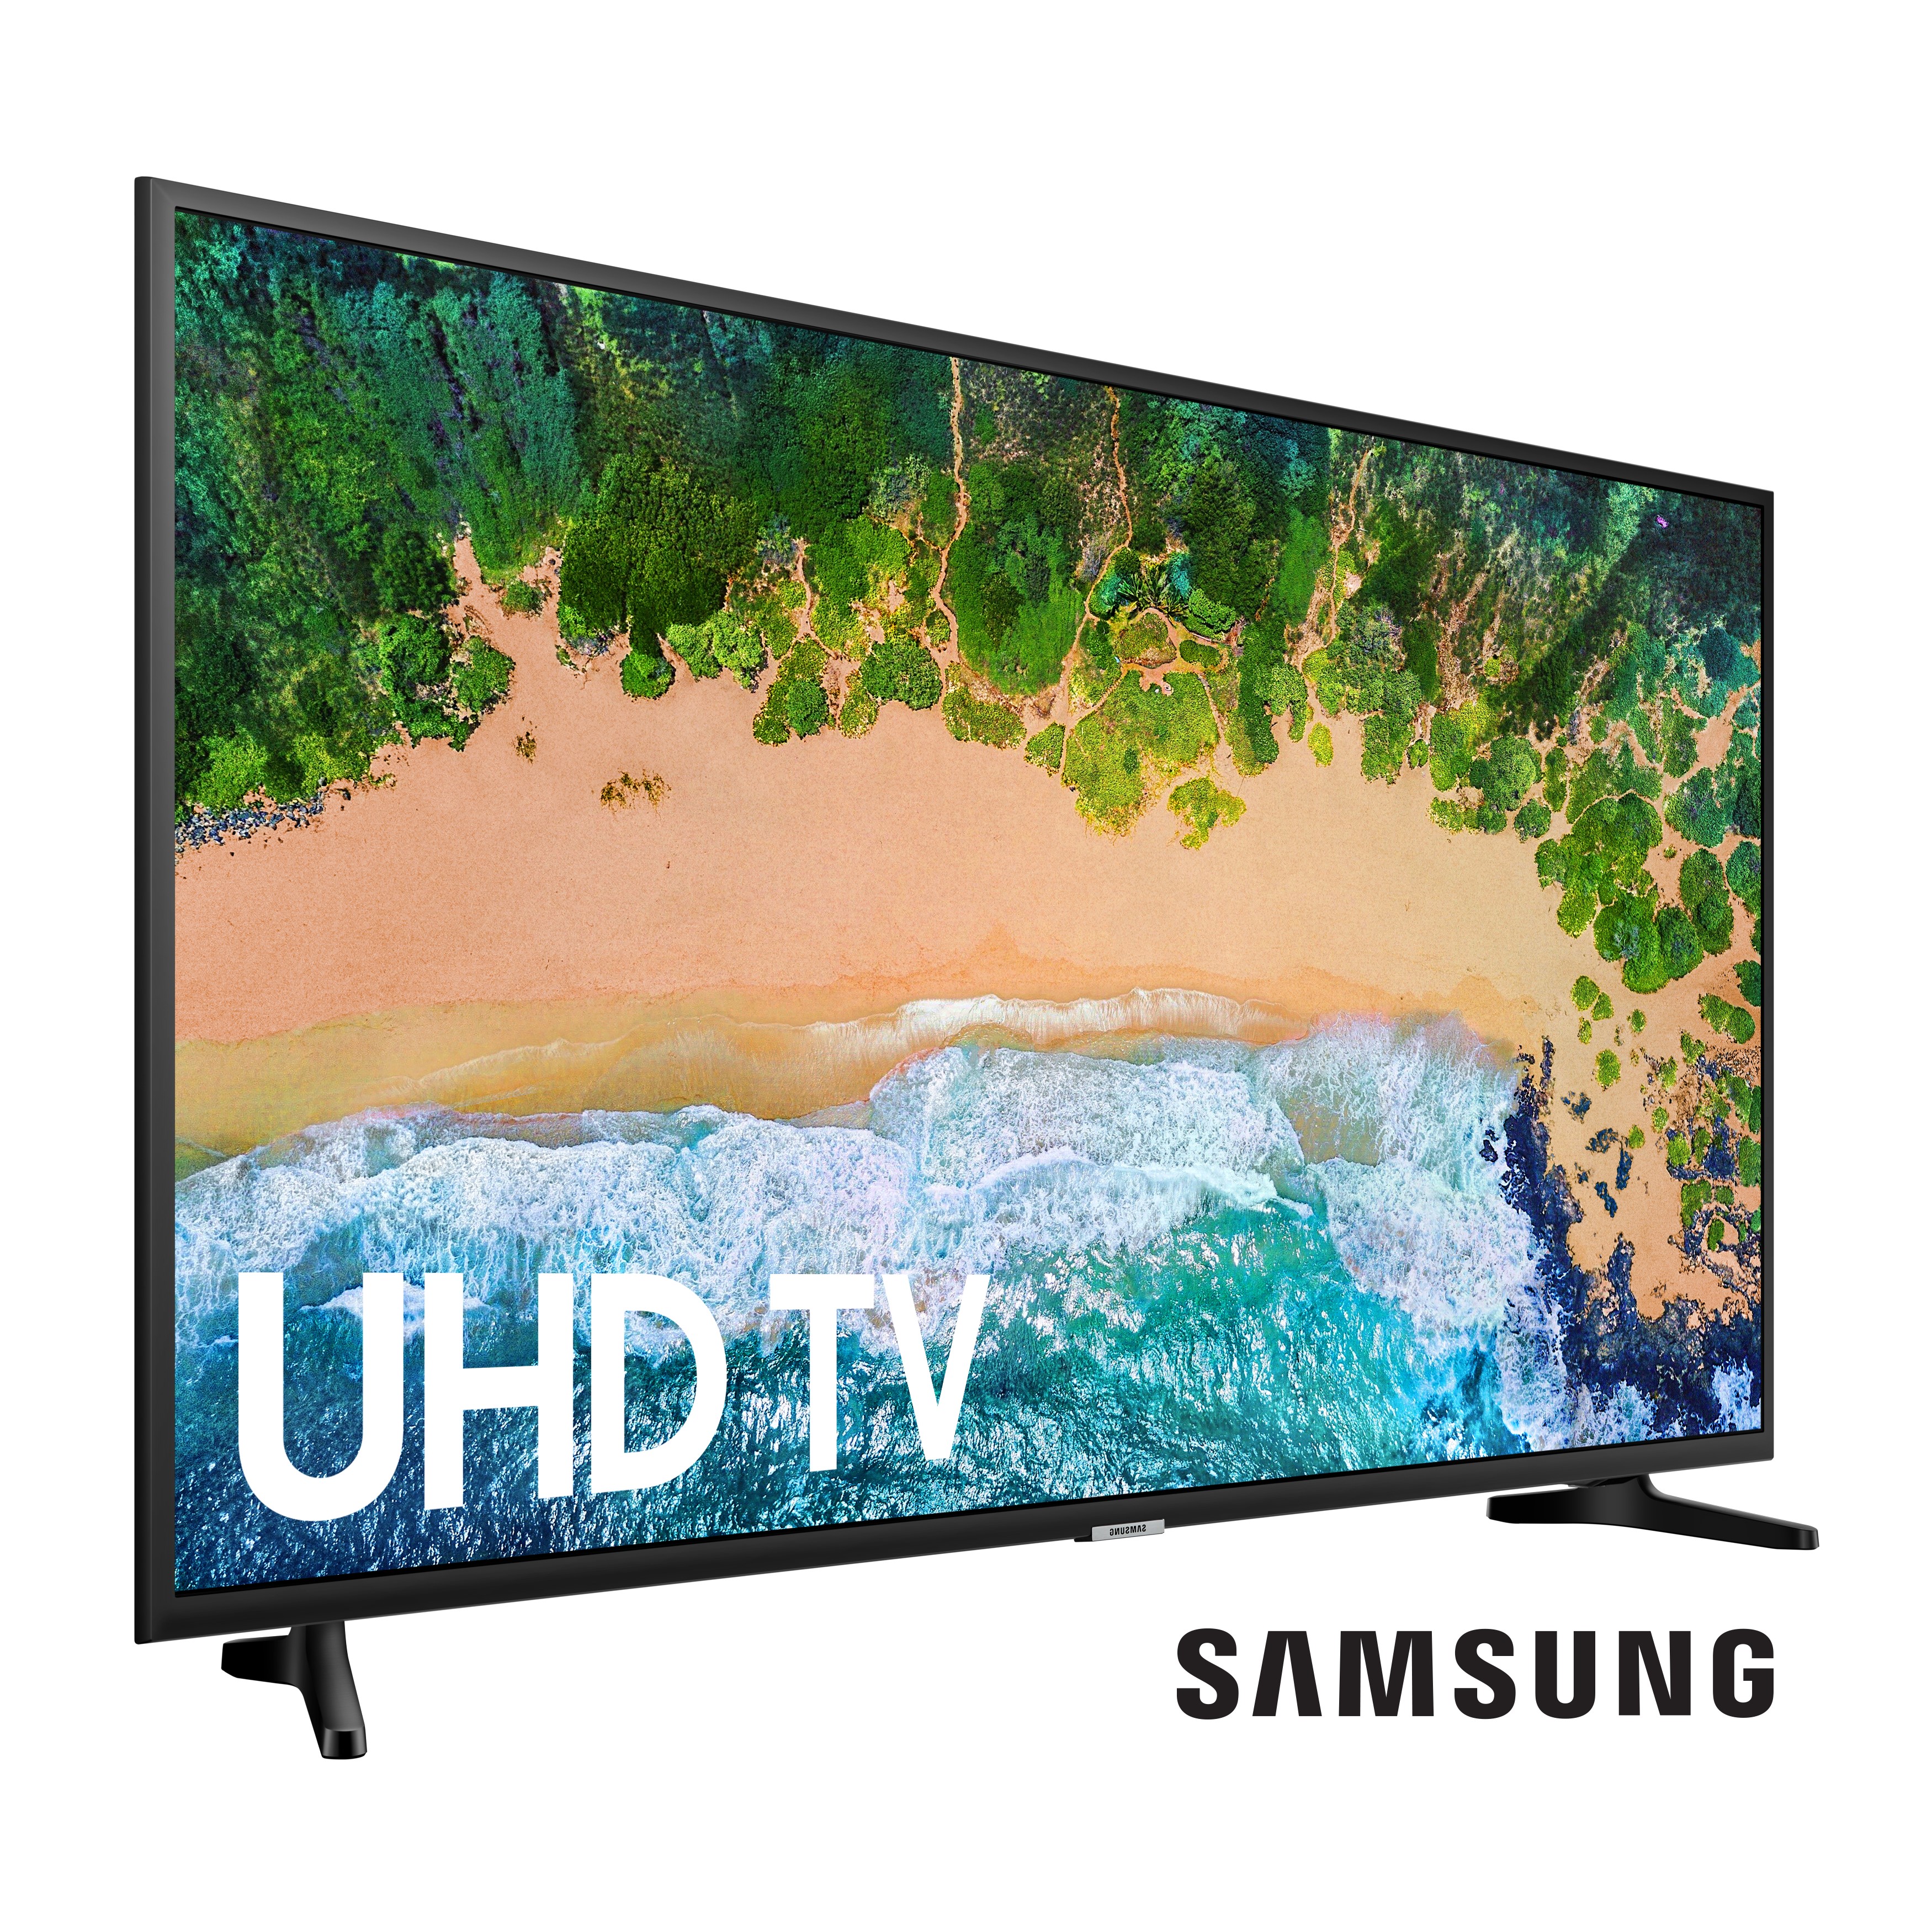 SAMSUNG 55" Class 4K UHD 2160p LED Smart TV with HDR UN55NU6900 - image 3 of 23